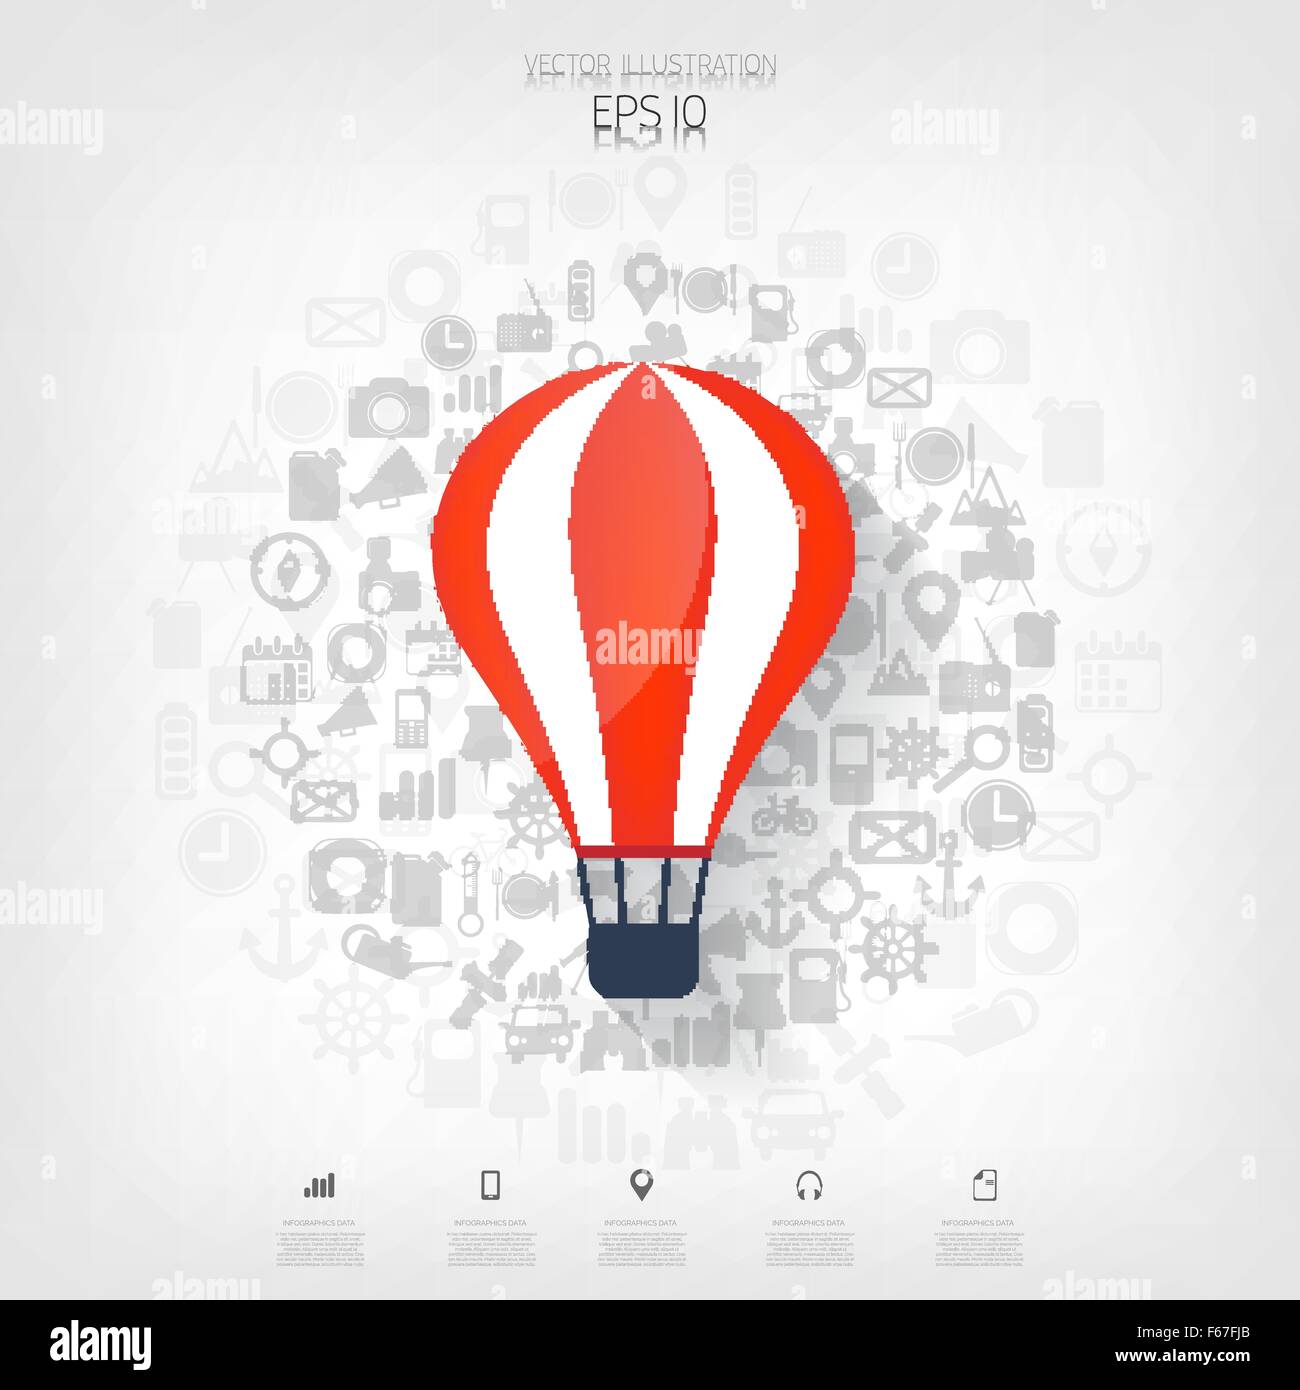 Flat air balloon web icon. Web application icons. Project start up. Business aim. Stock Vector